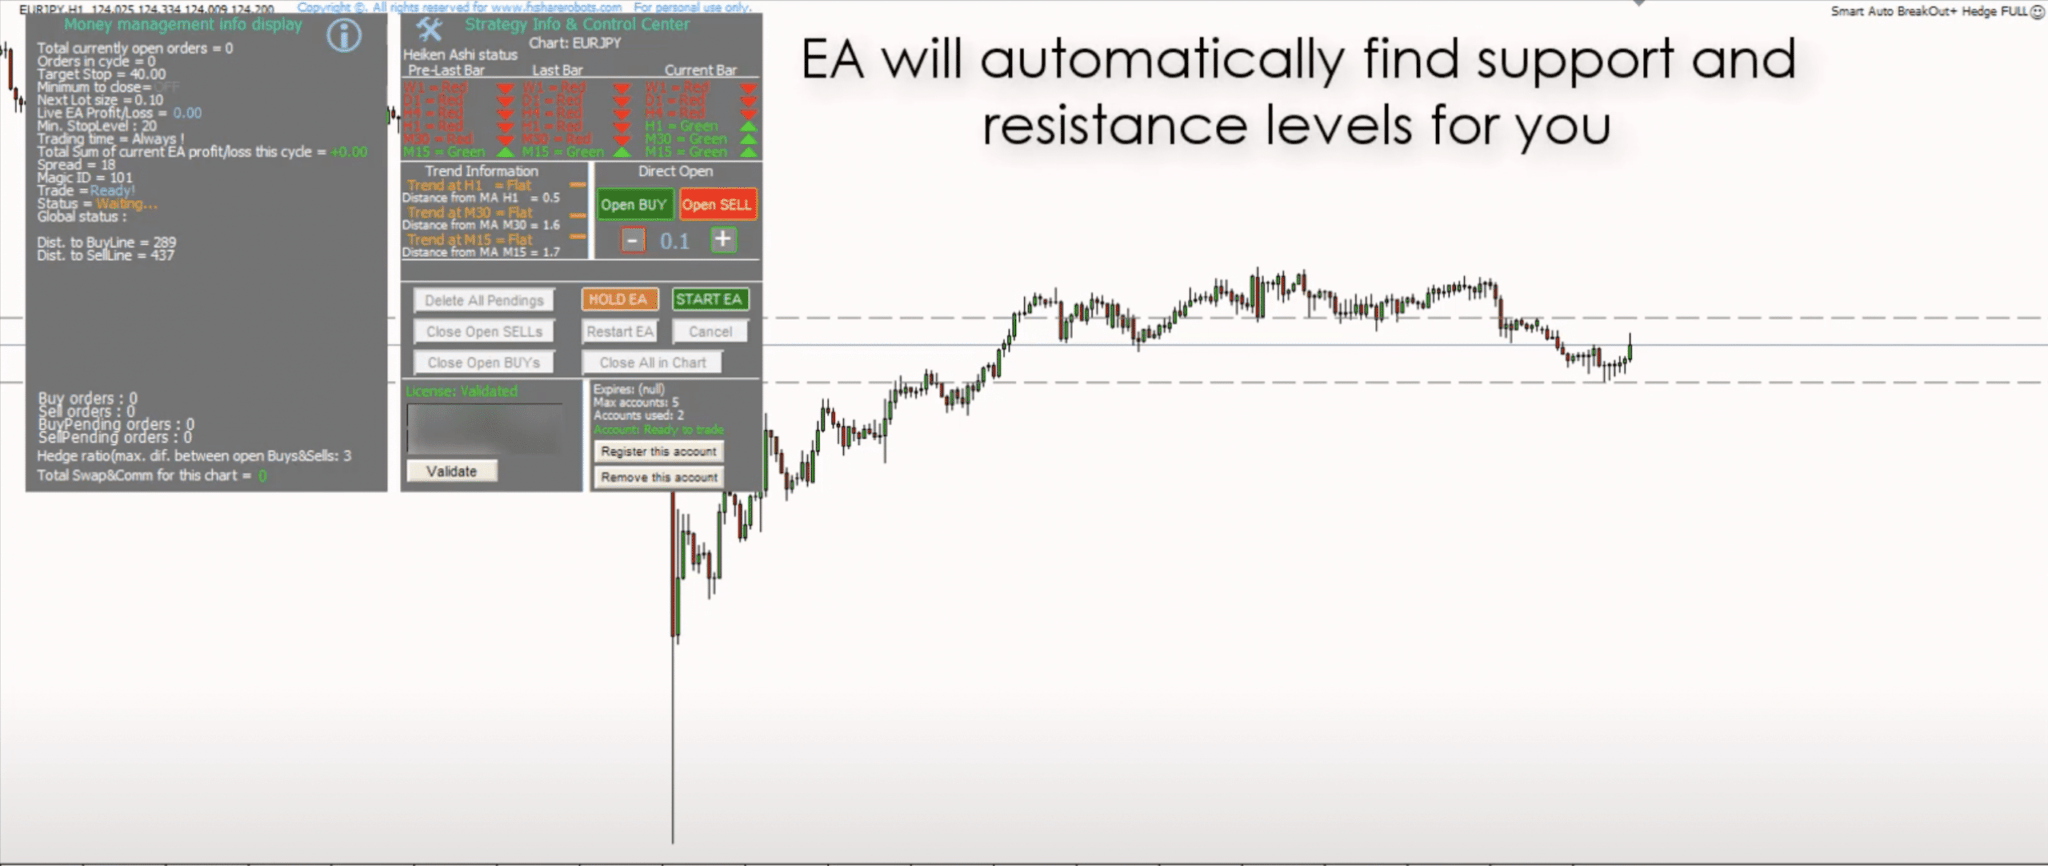 Best forex robot ea review